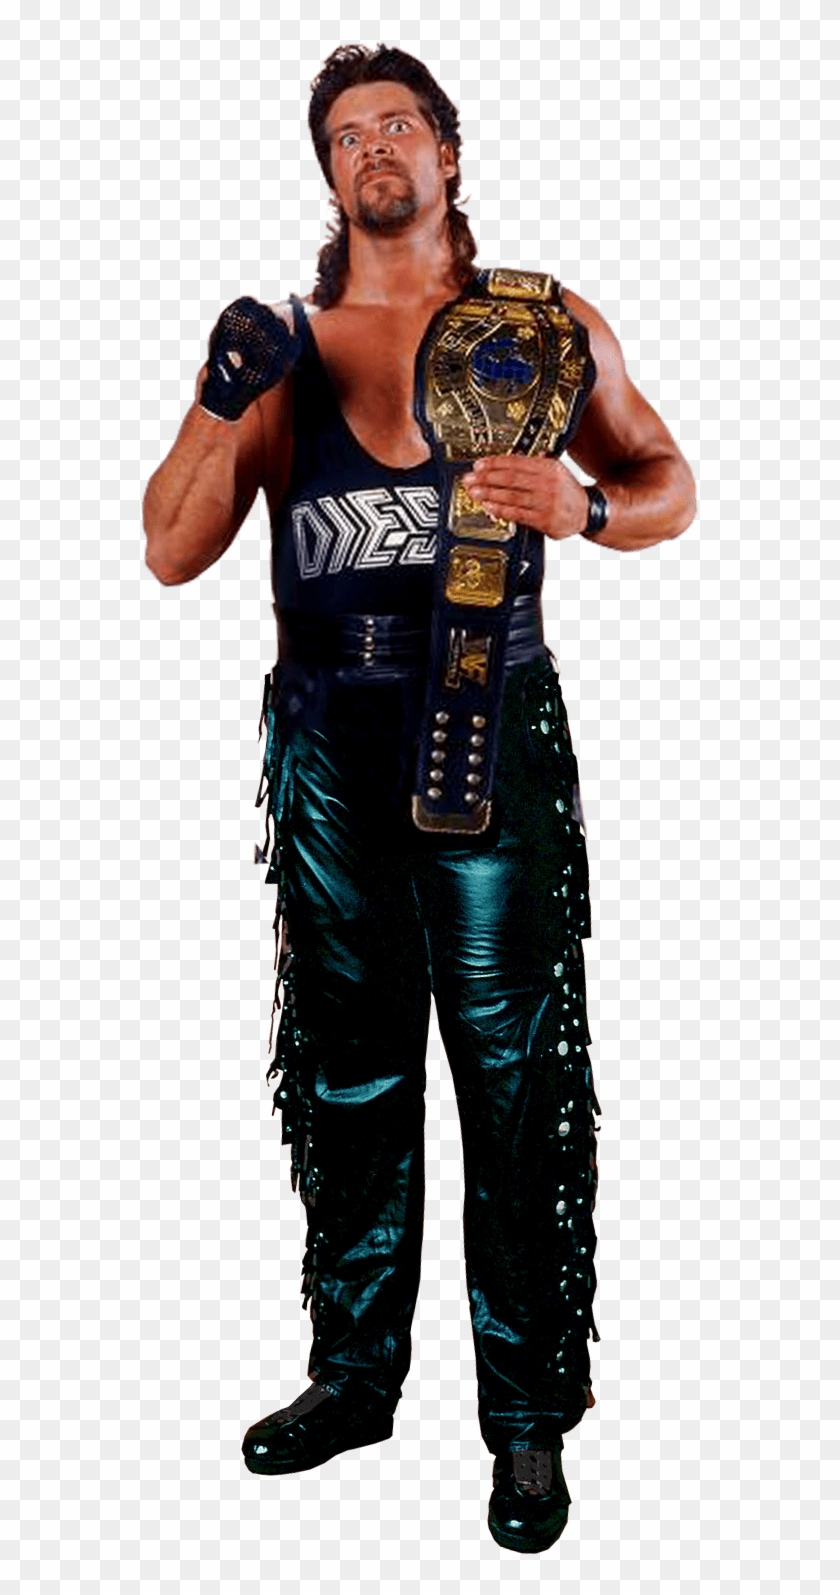 Diesel Wwe Champion Png Clipart #1698155